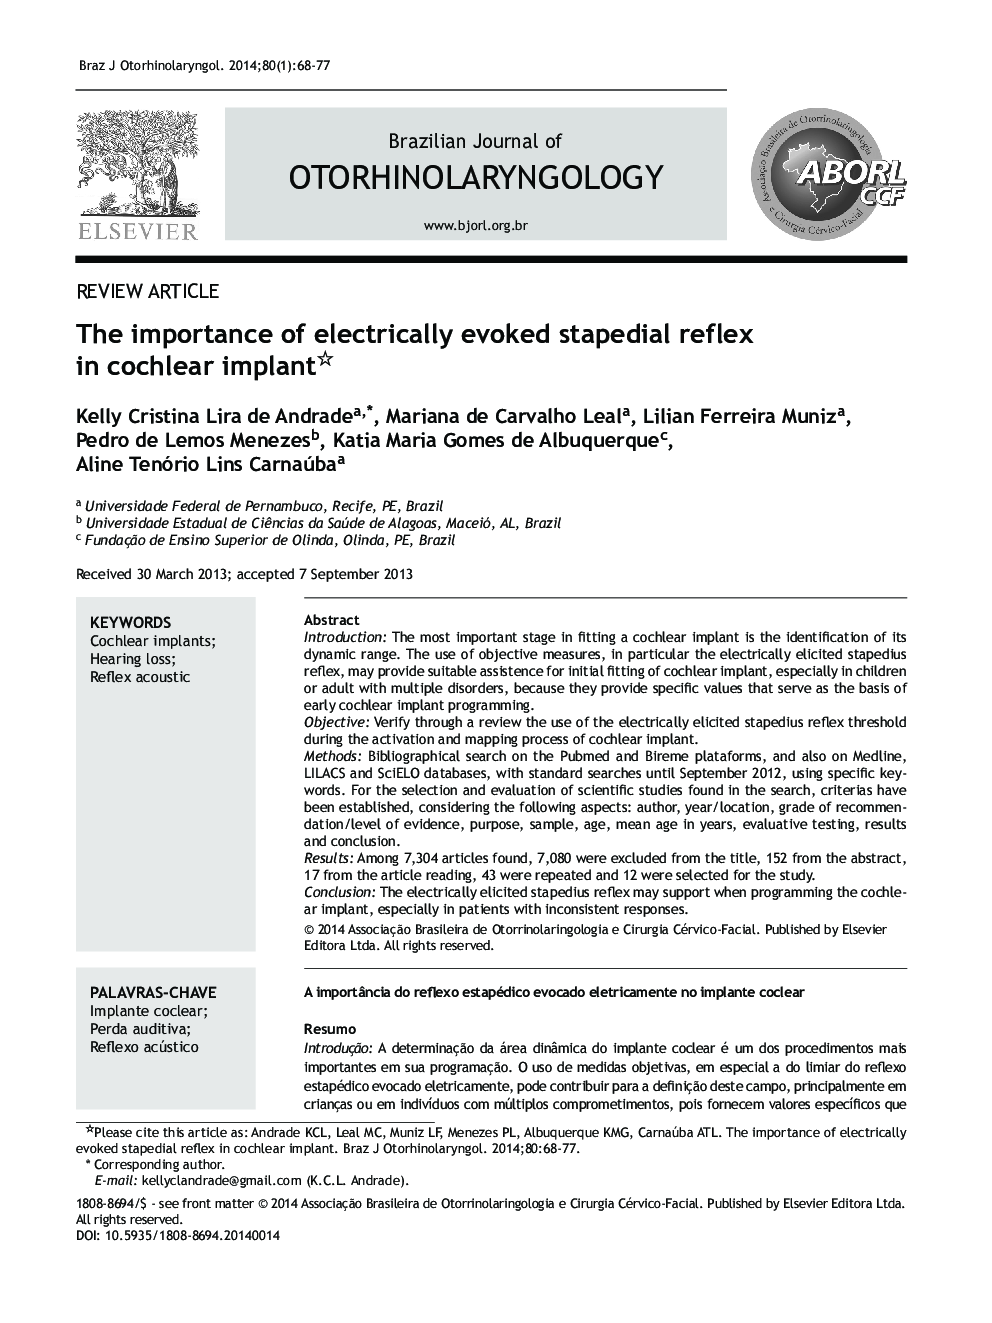 The importance of electrically evoked stapedial reflex in cochlear implant✩